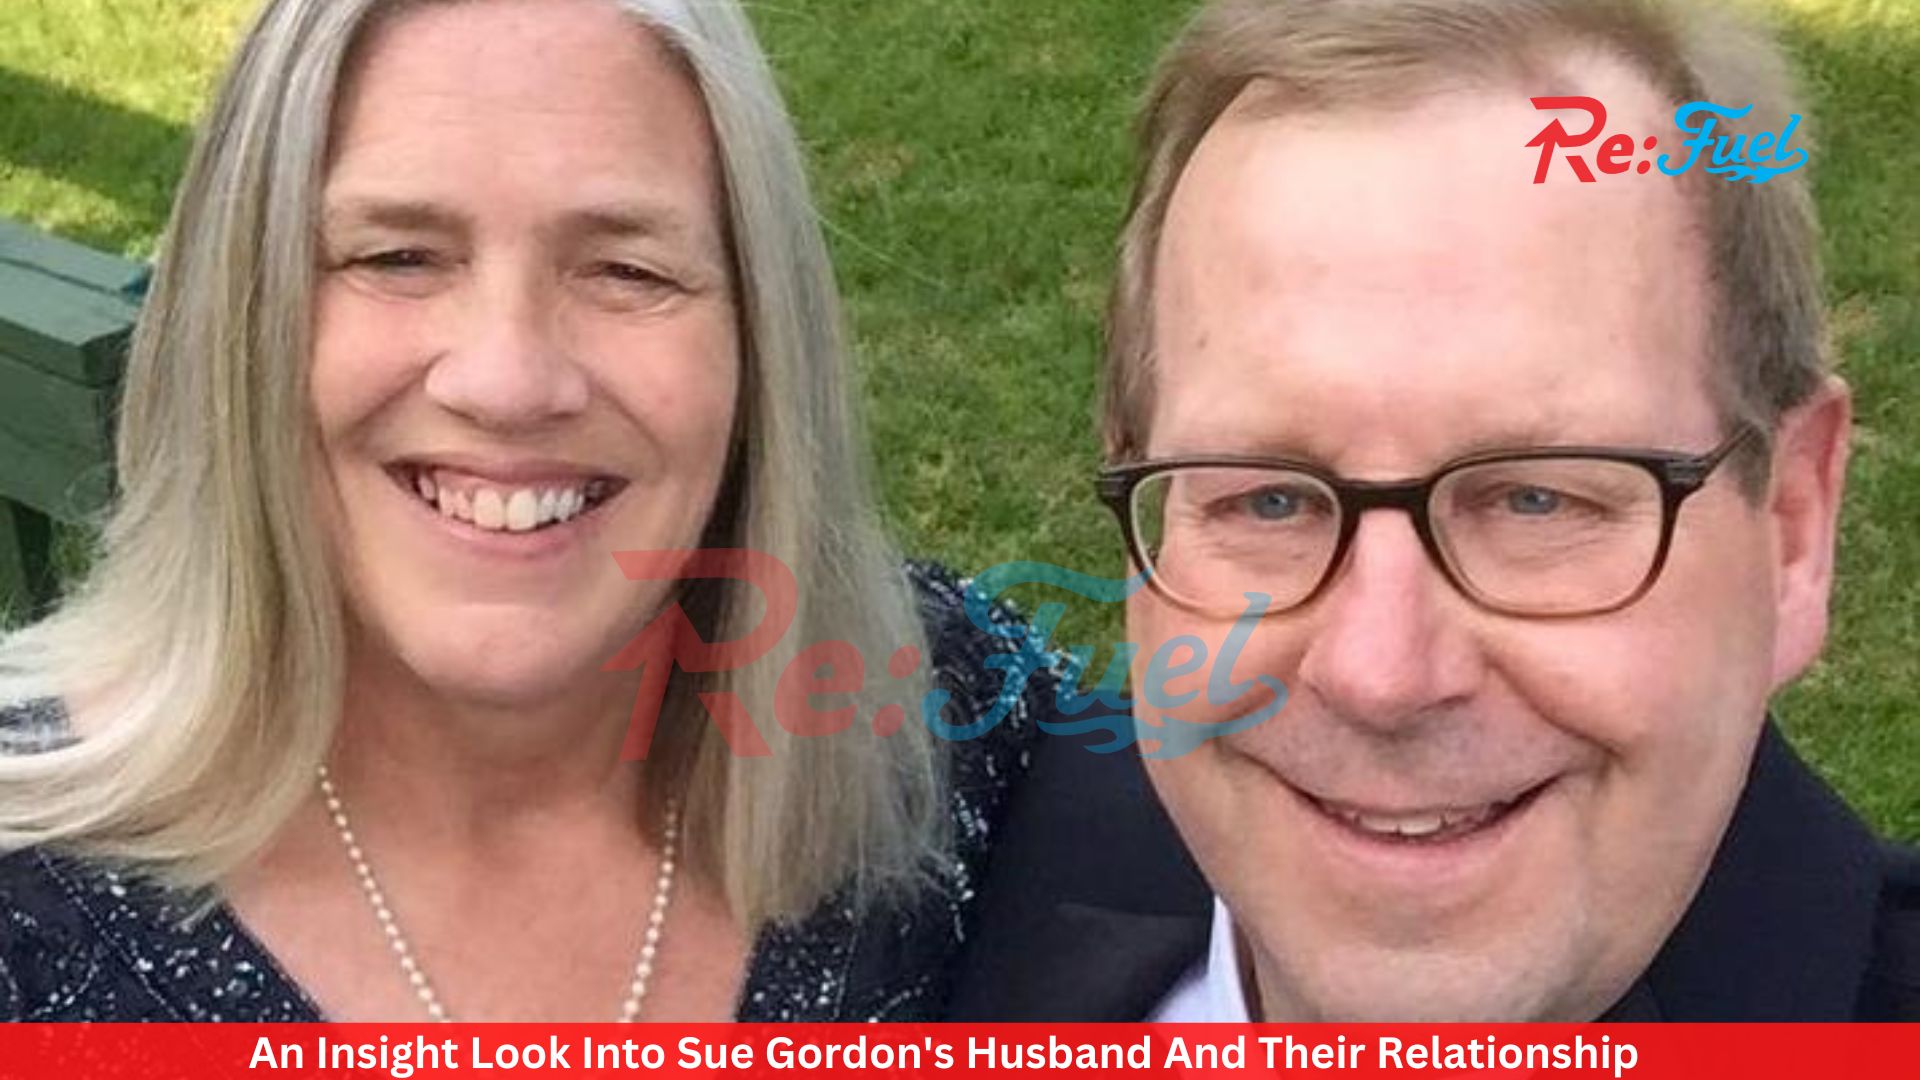 An Insight Look Into Sue Gordon's Husband And Their Relationship